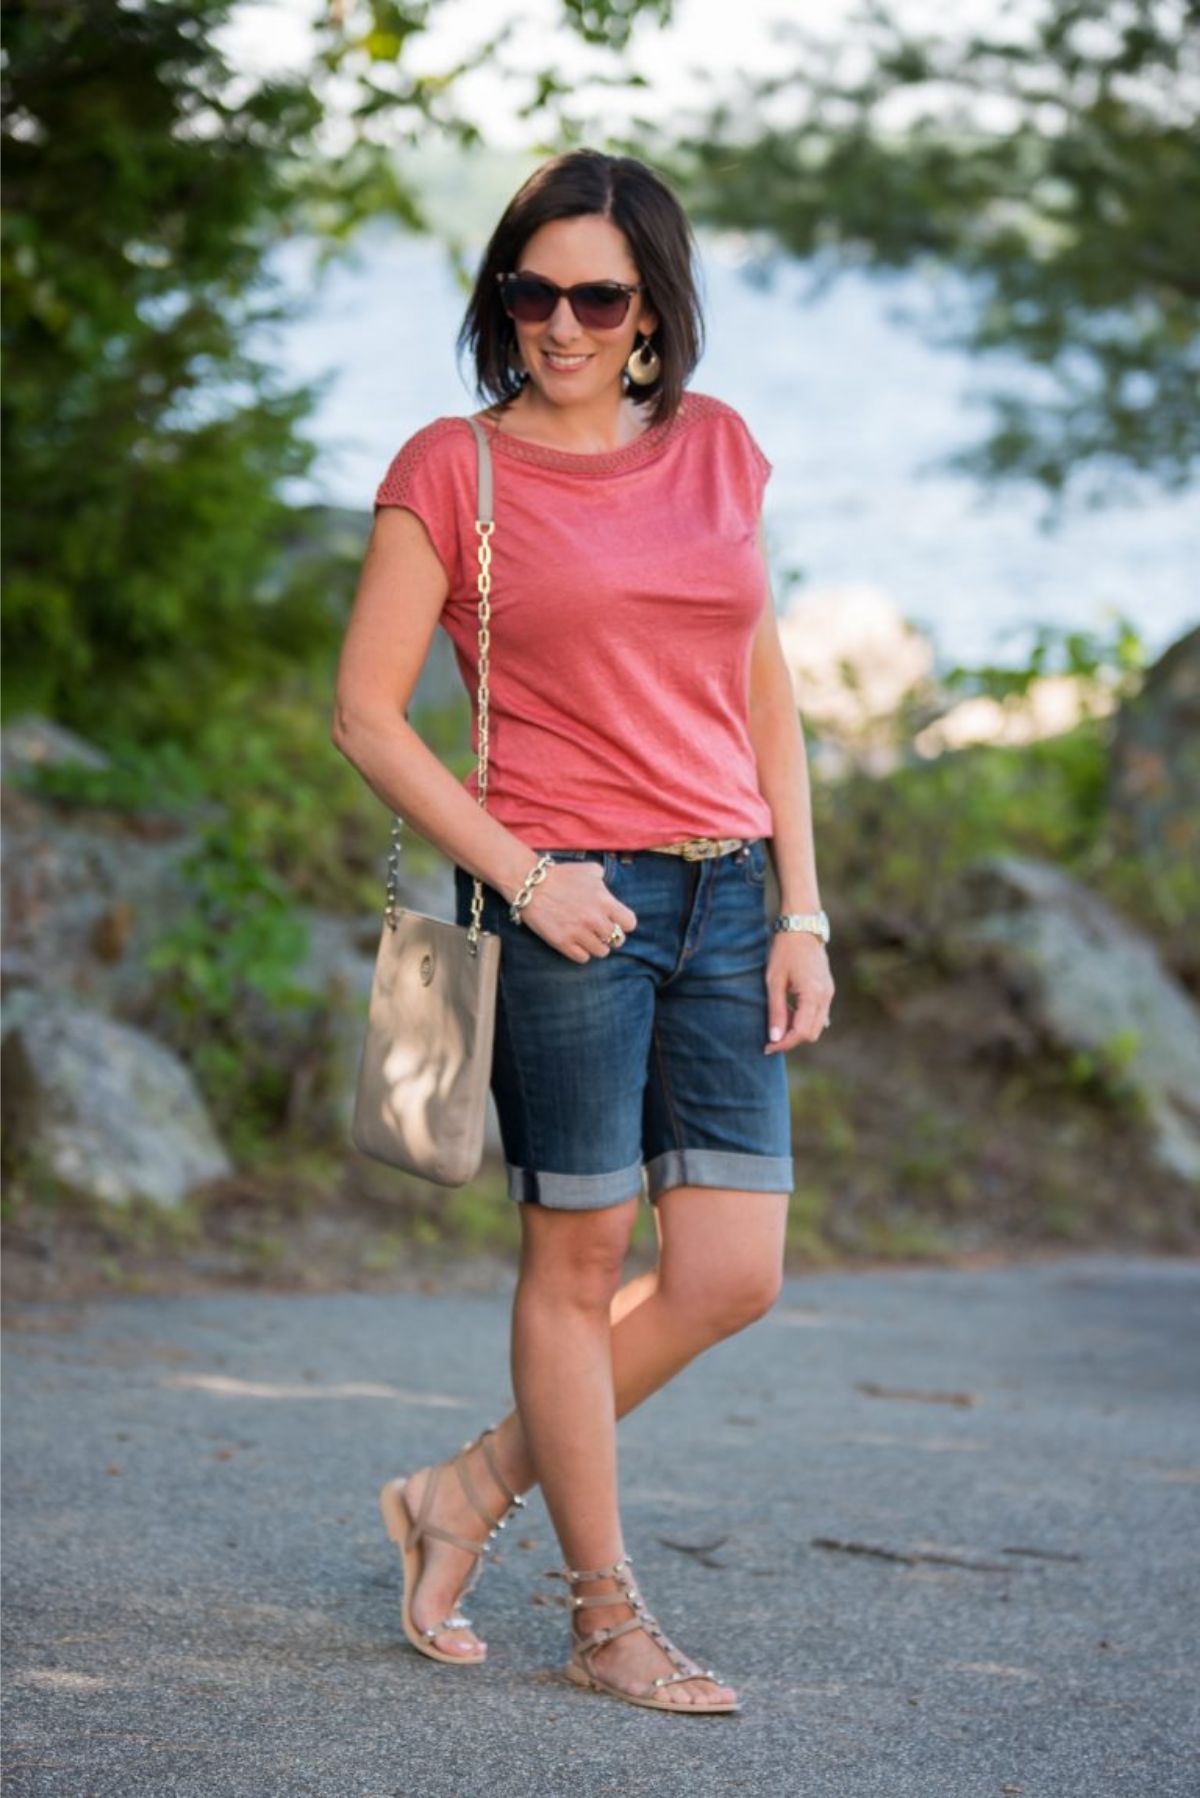 styling bermuda shorts by rolling them up